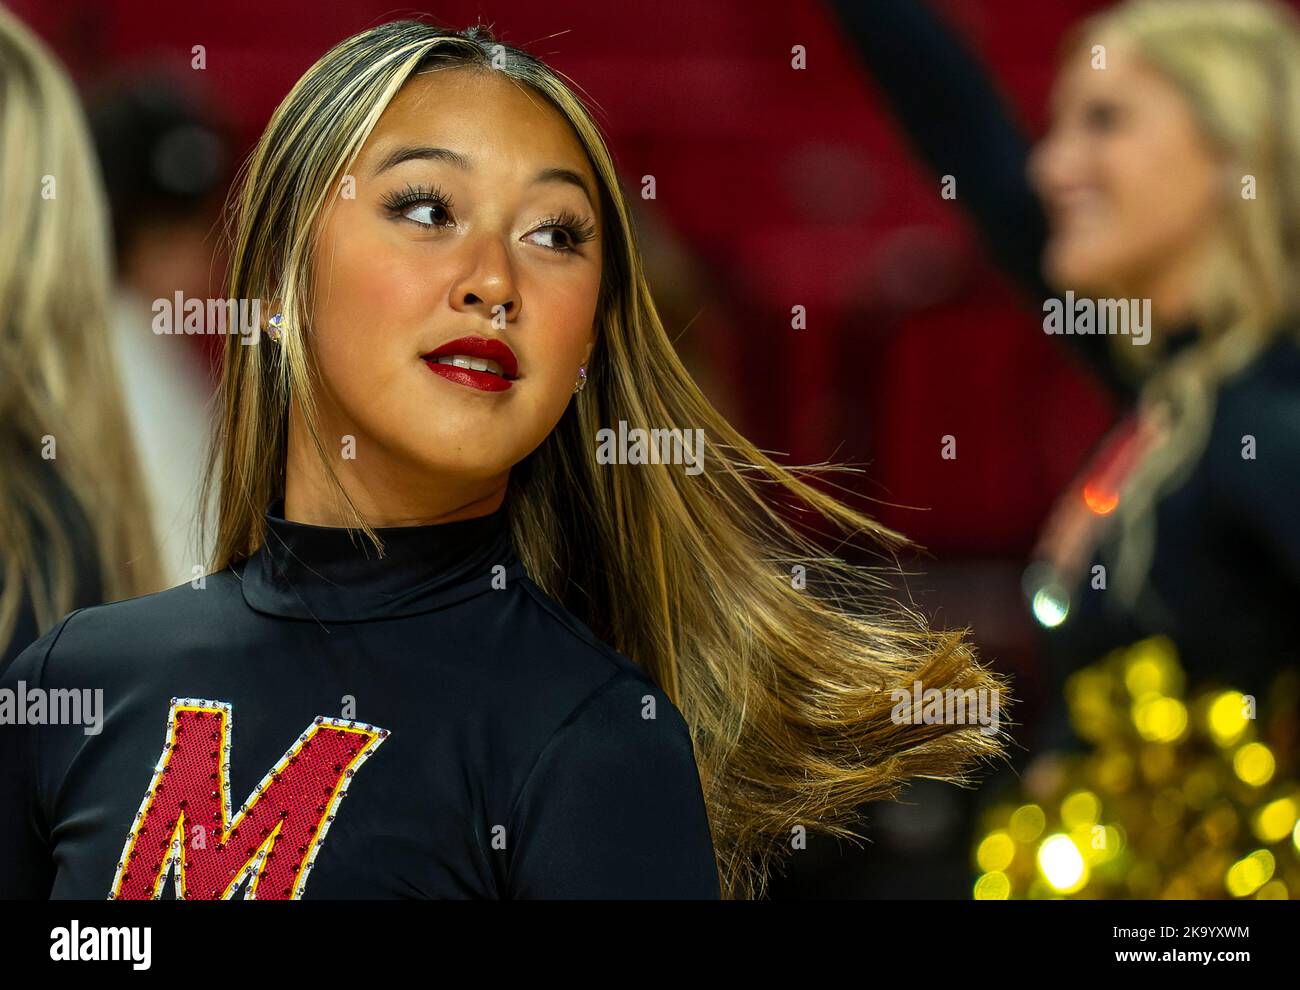 Cheerleader performs during a college basketball game Stock Photo